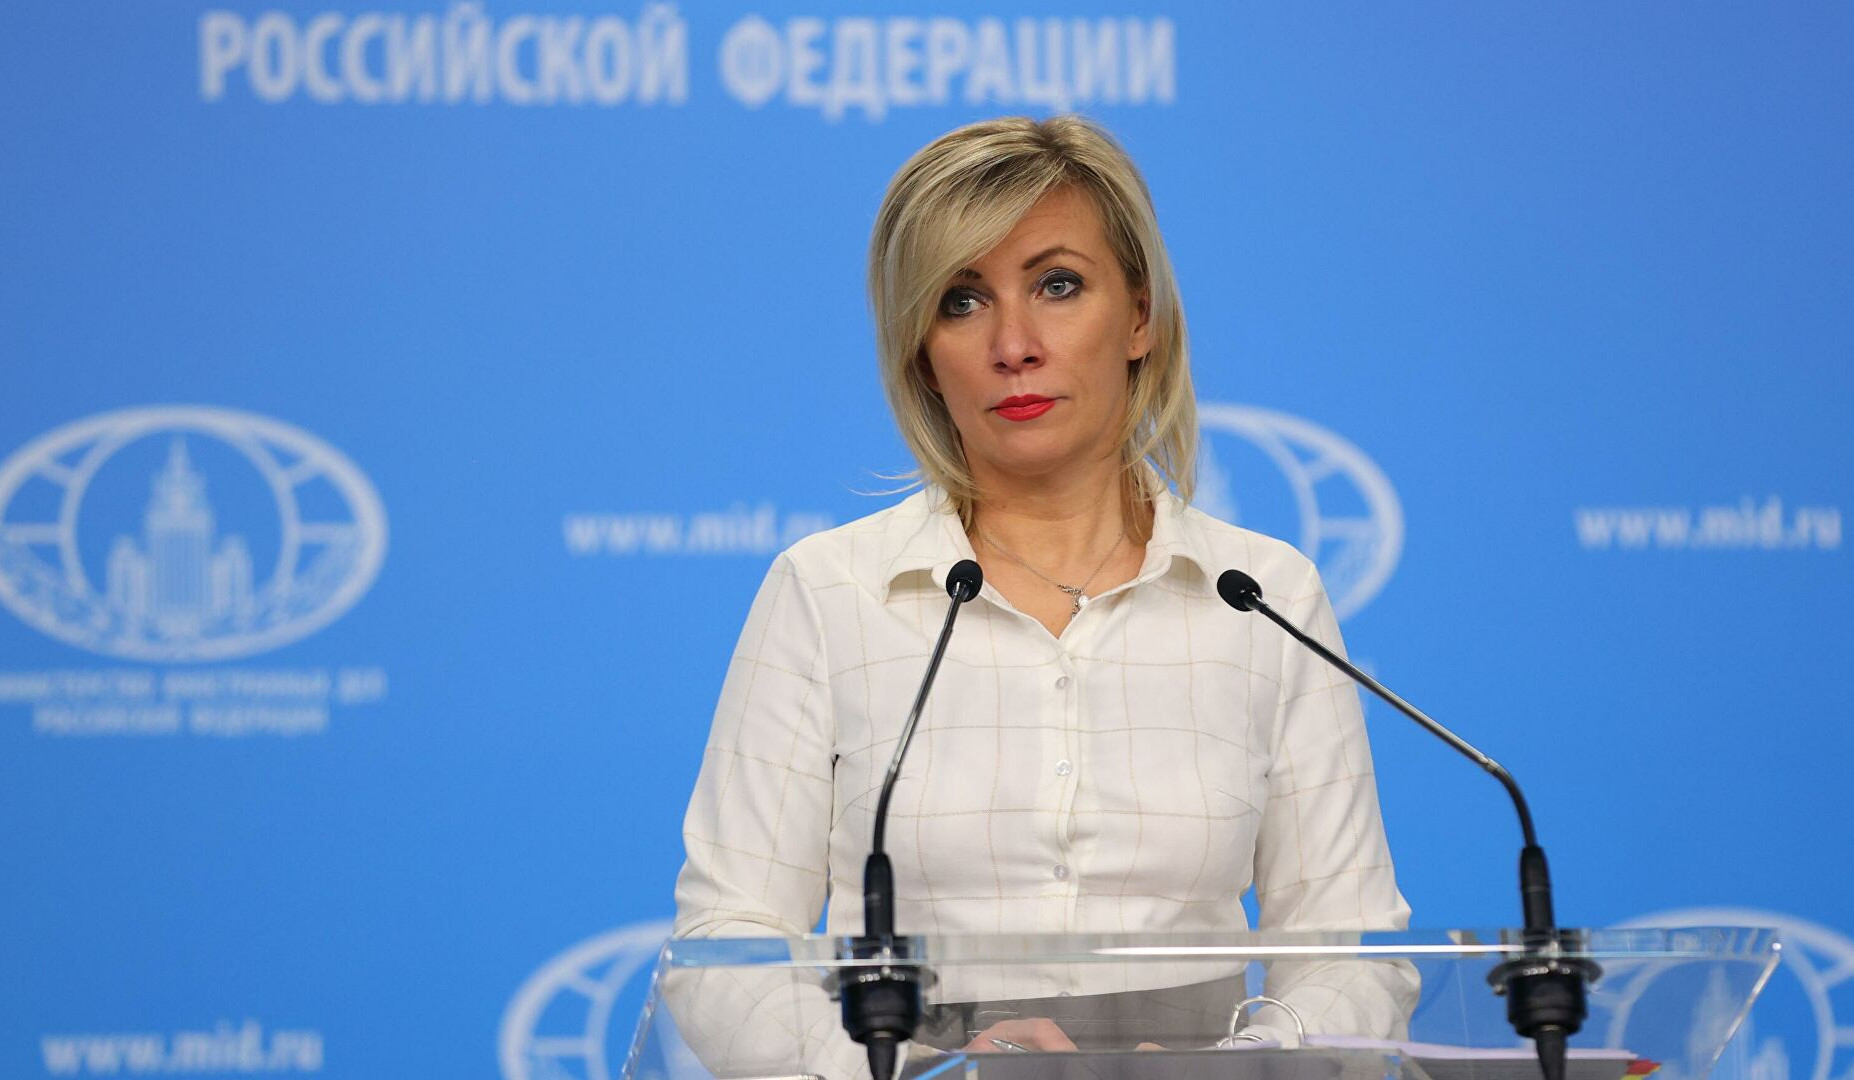 Zakharova spoke about positive changes in relations with United States